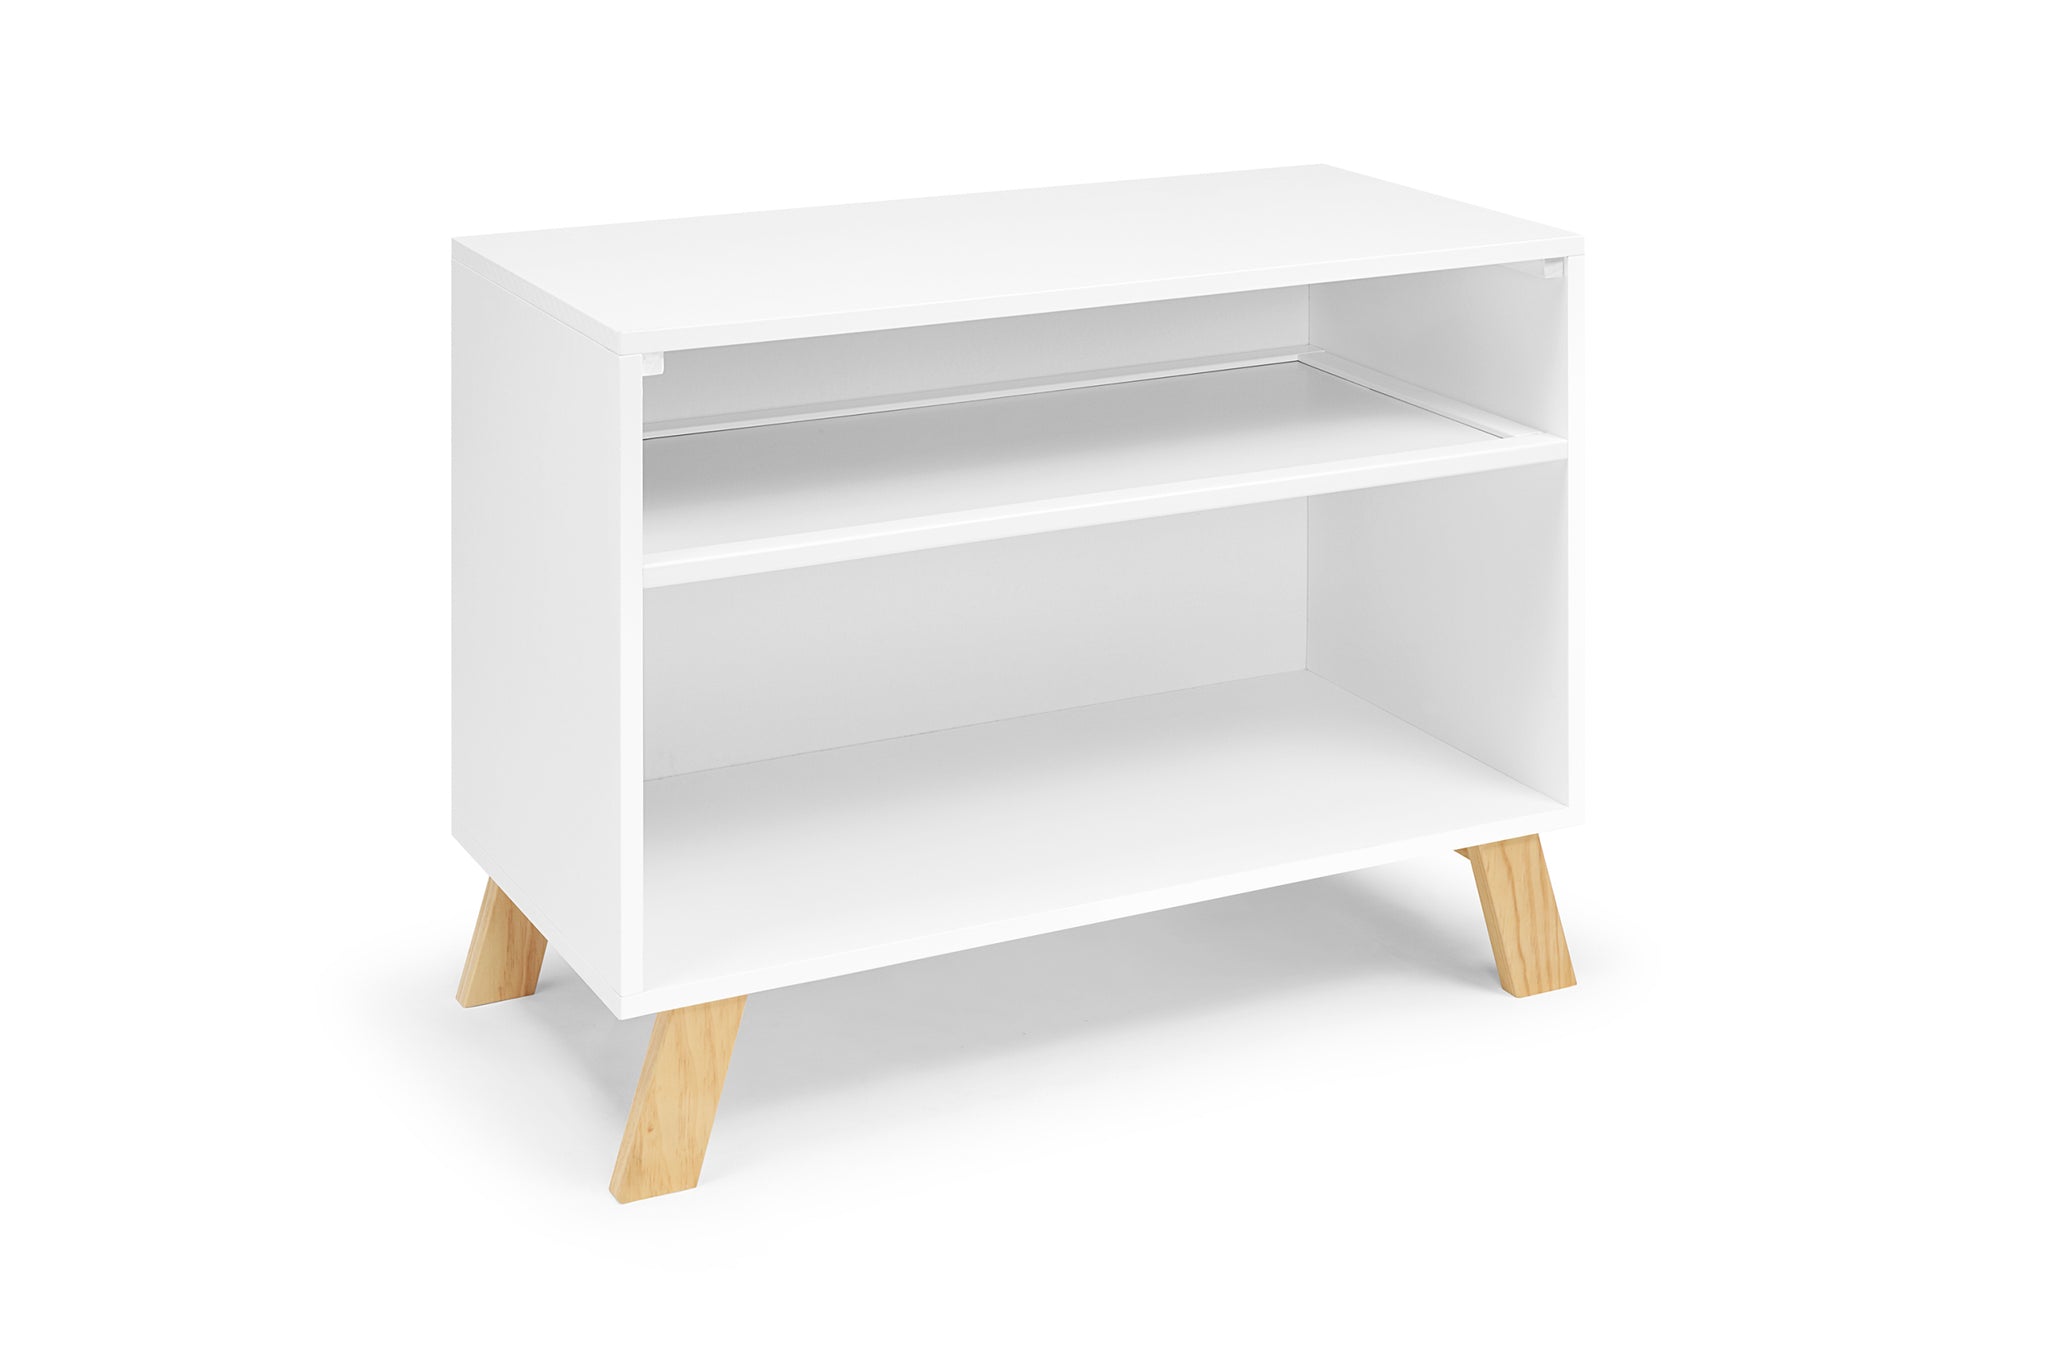 Livia Multi Purpose Changing Table White Natural white-solid wood